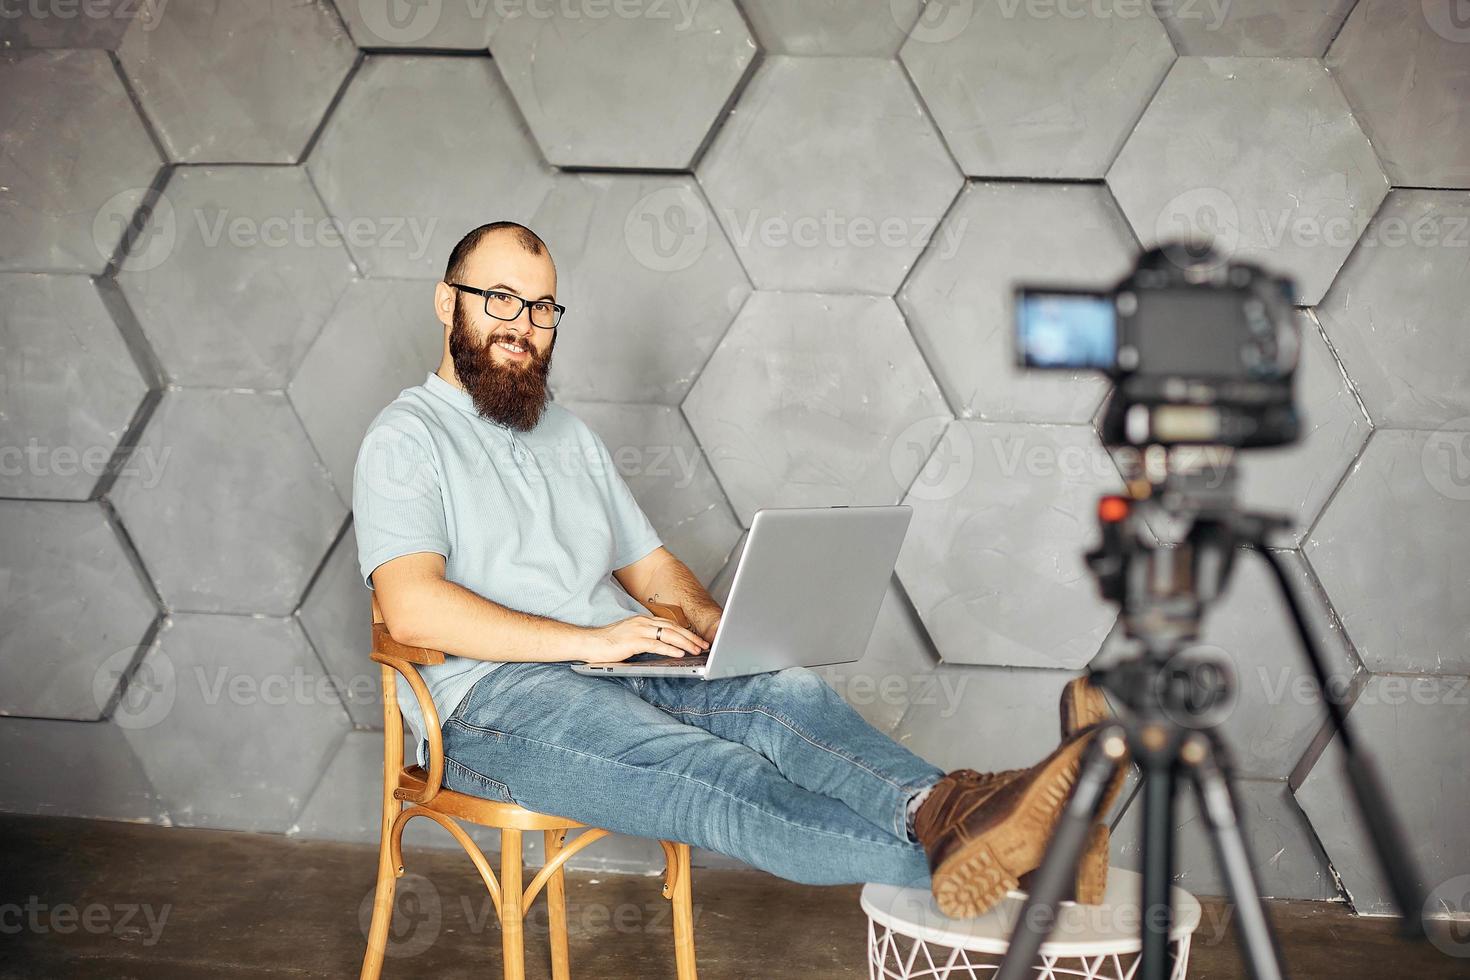 content creation for social media. bearded man shooting video of himself using camera on tripod. modern technology and blogging freelance work concept. photo